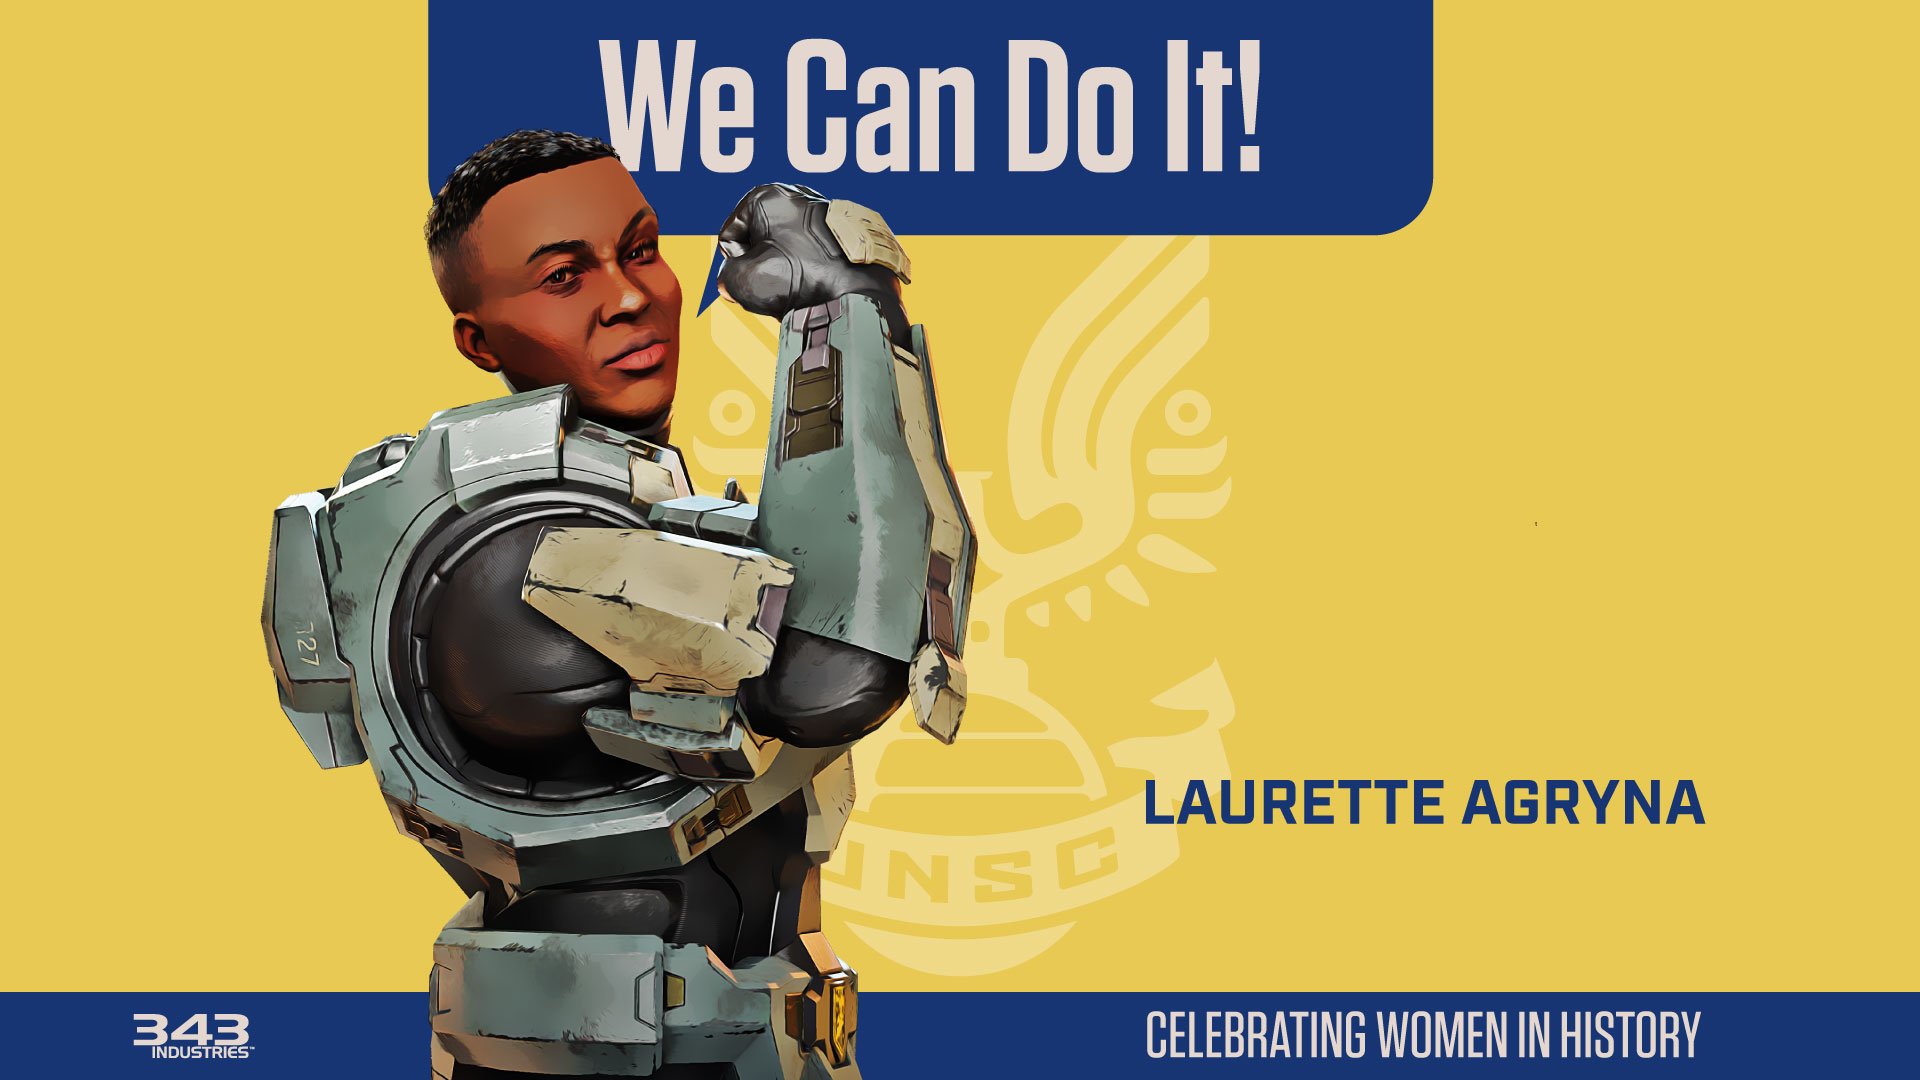 Commander Agryna posed as Rosie the Riveter, saying "We Can Do It!"